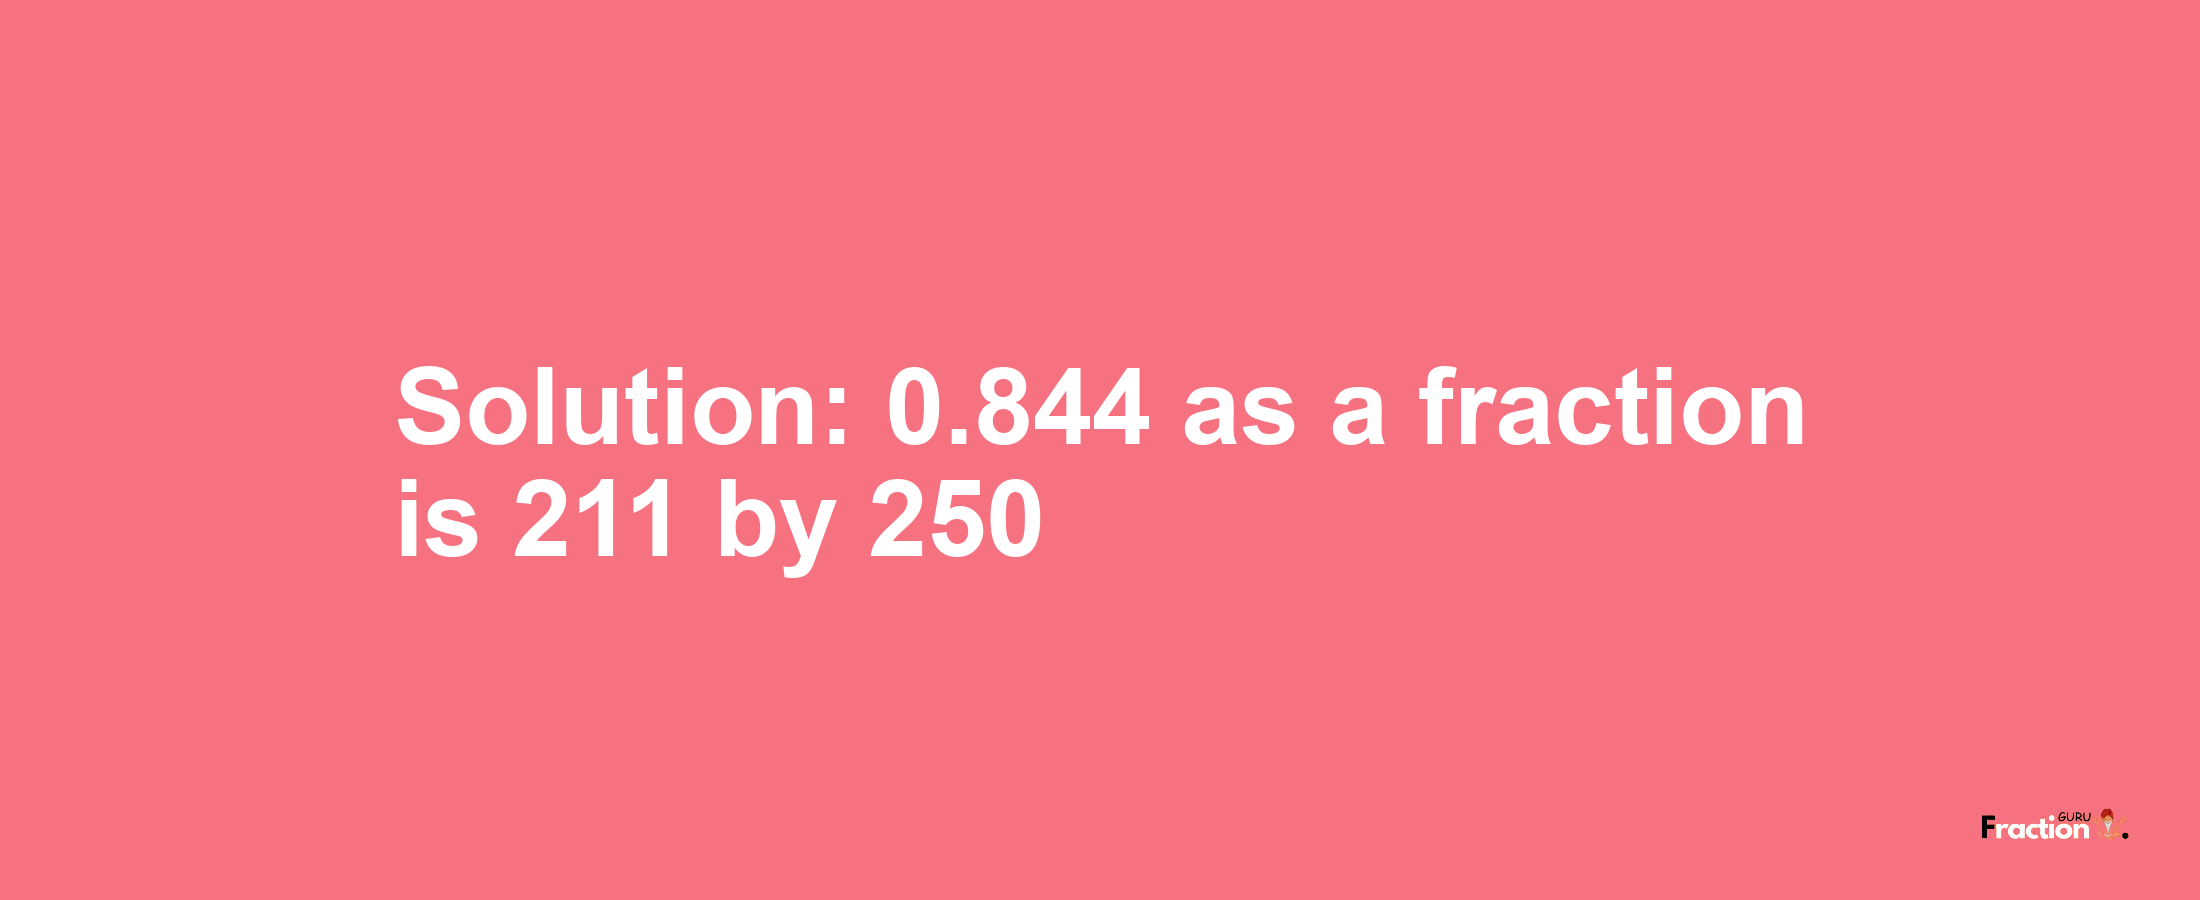 Solution:0.844 as a fraction is 211/250